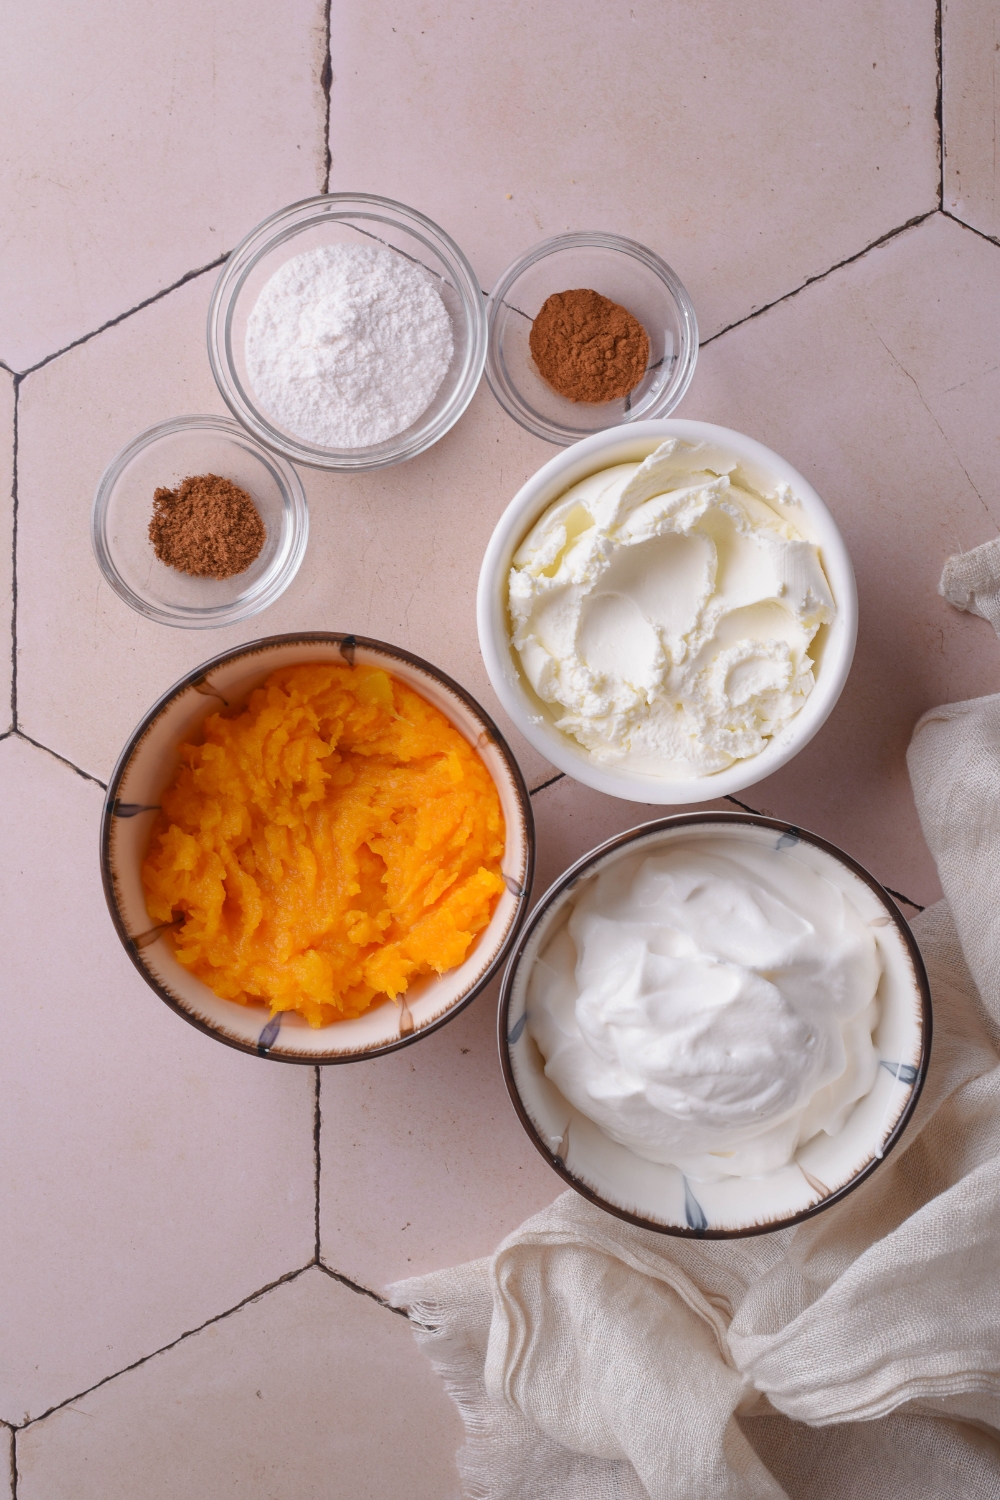 An assortment of ingredients including bowls of whipped cream, pumpkin puree, cream cheese, and spices.